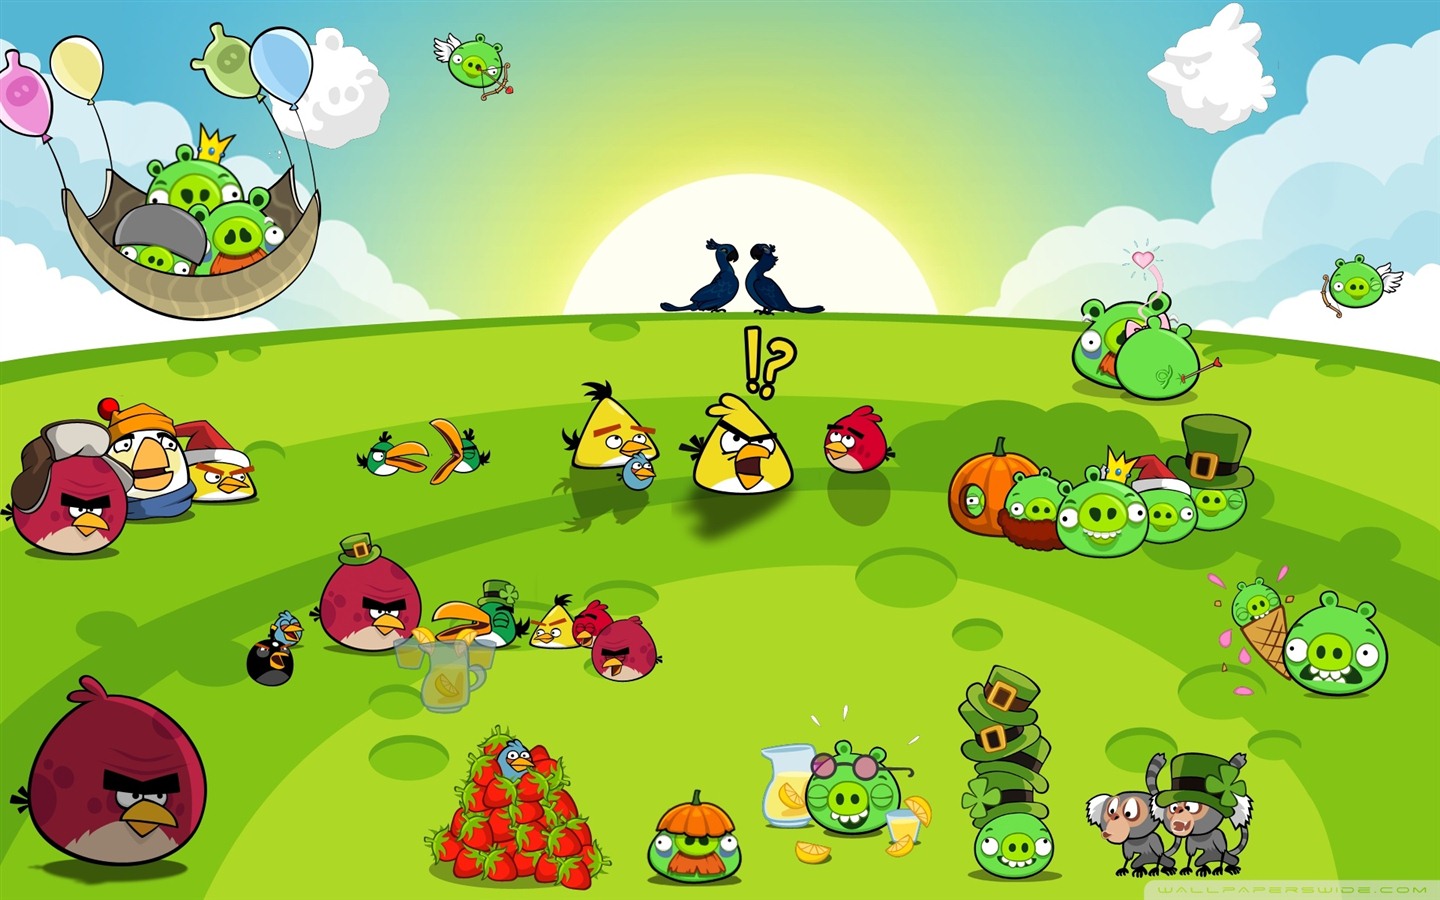 Angry Birds Game Wallpapers #11 - 1440x900